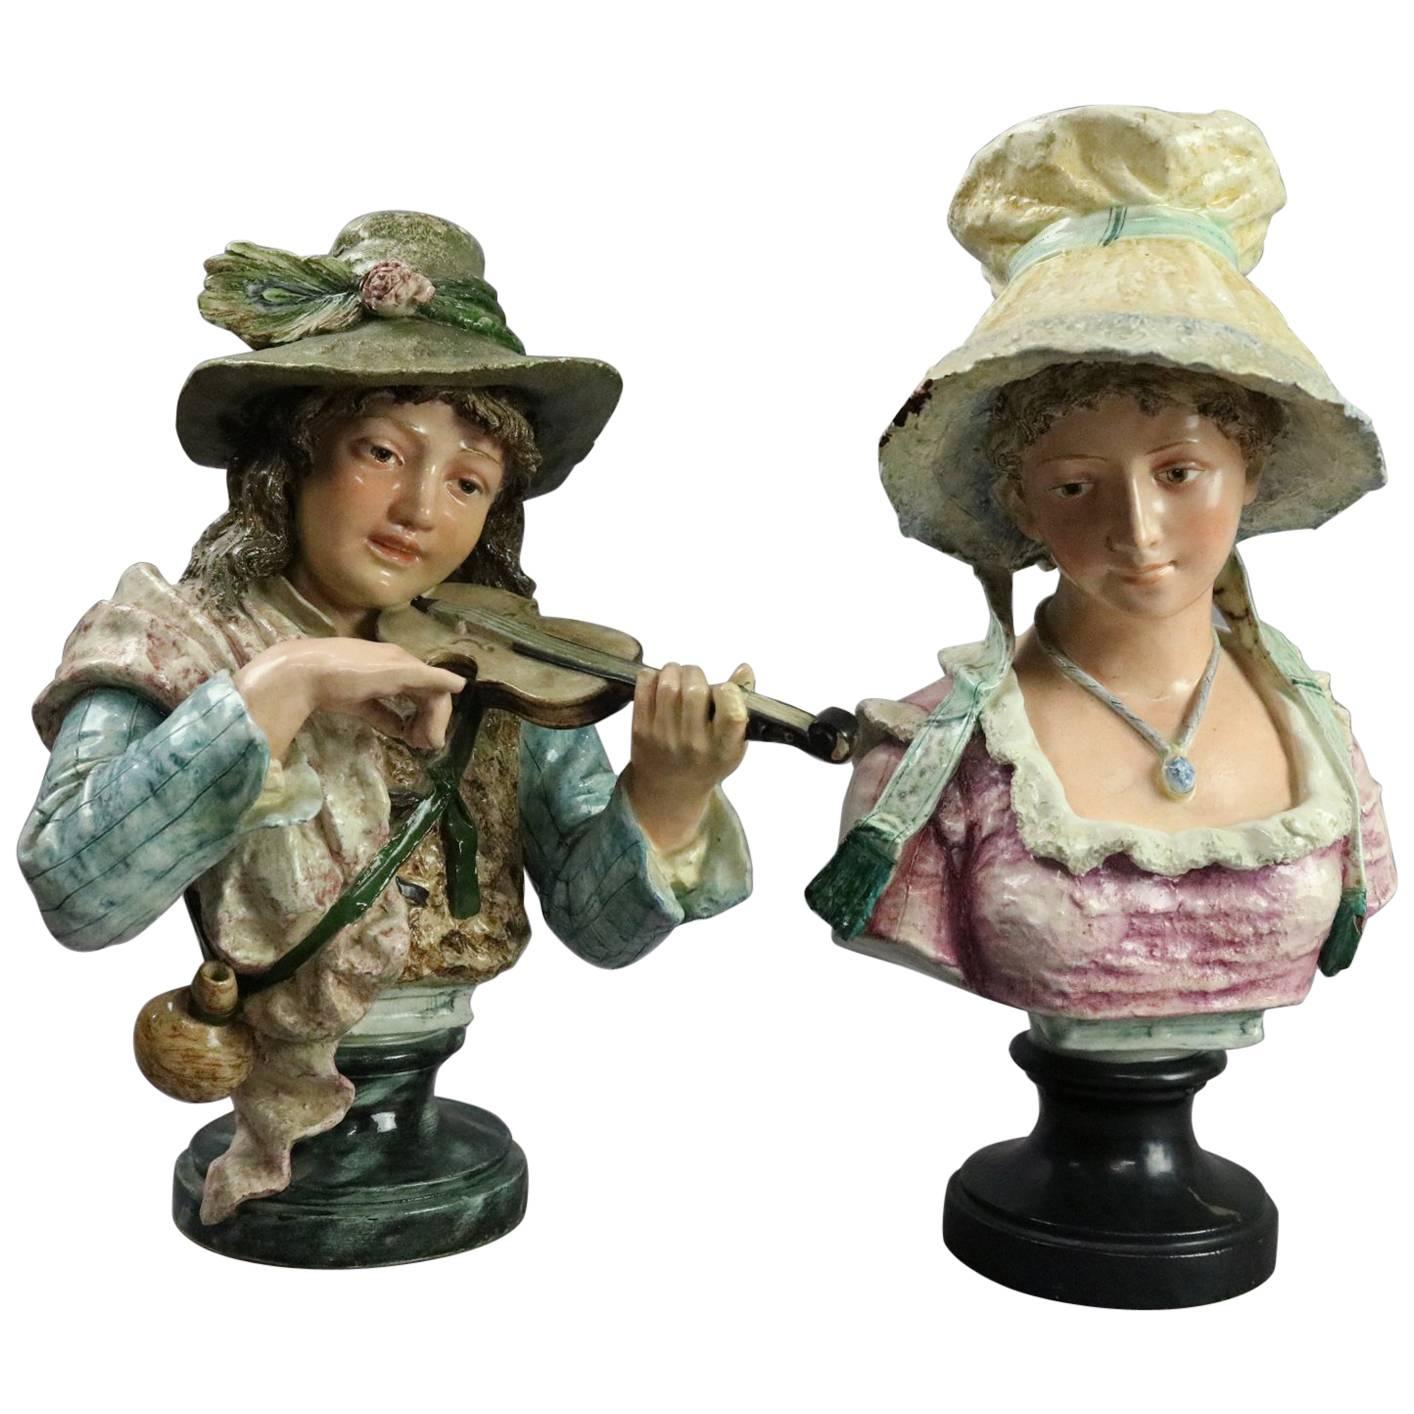 Pair of Antique German Majolica Pottery Busts, Young Woman and Musician